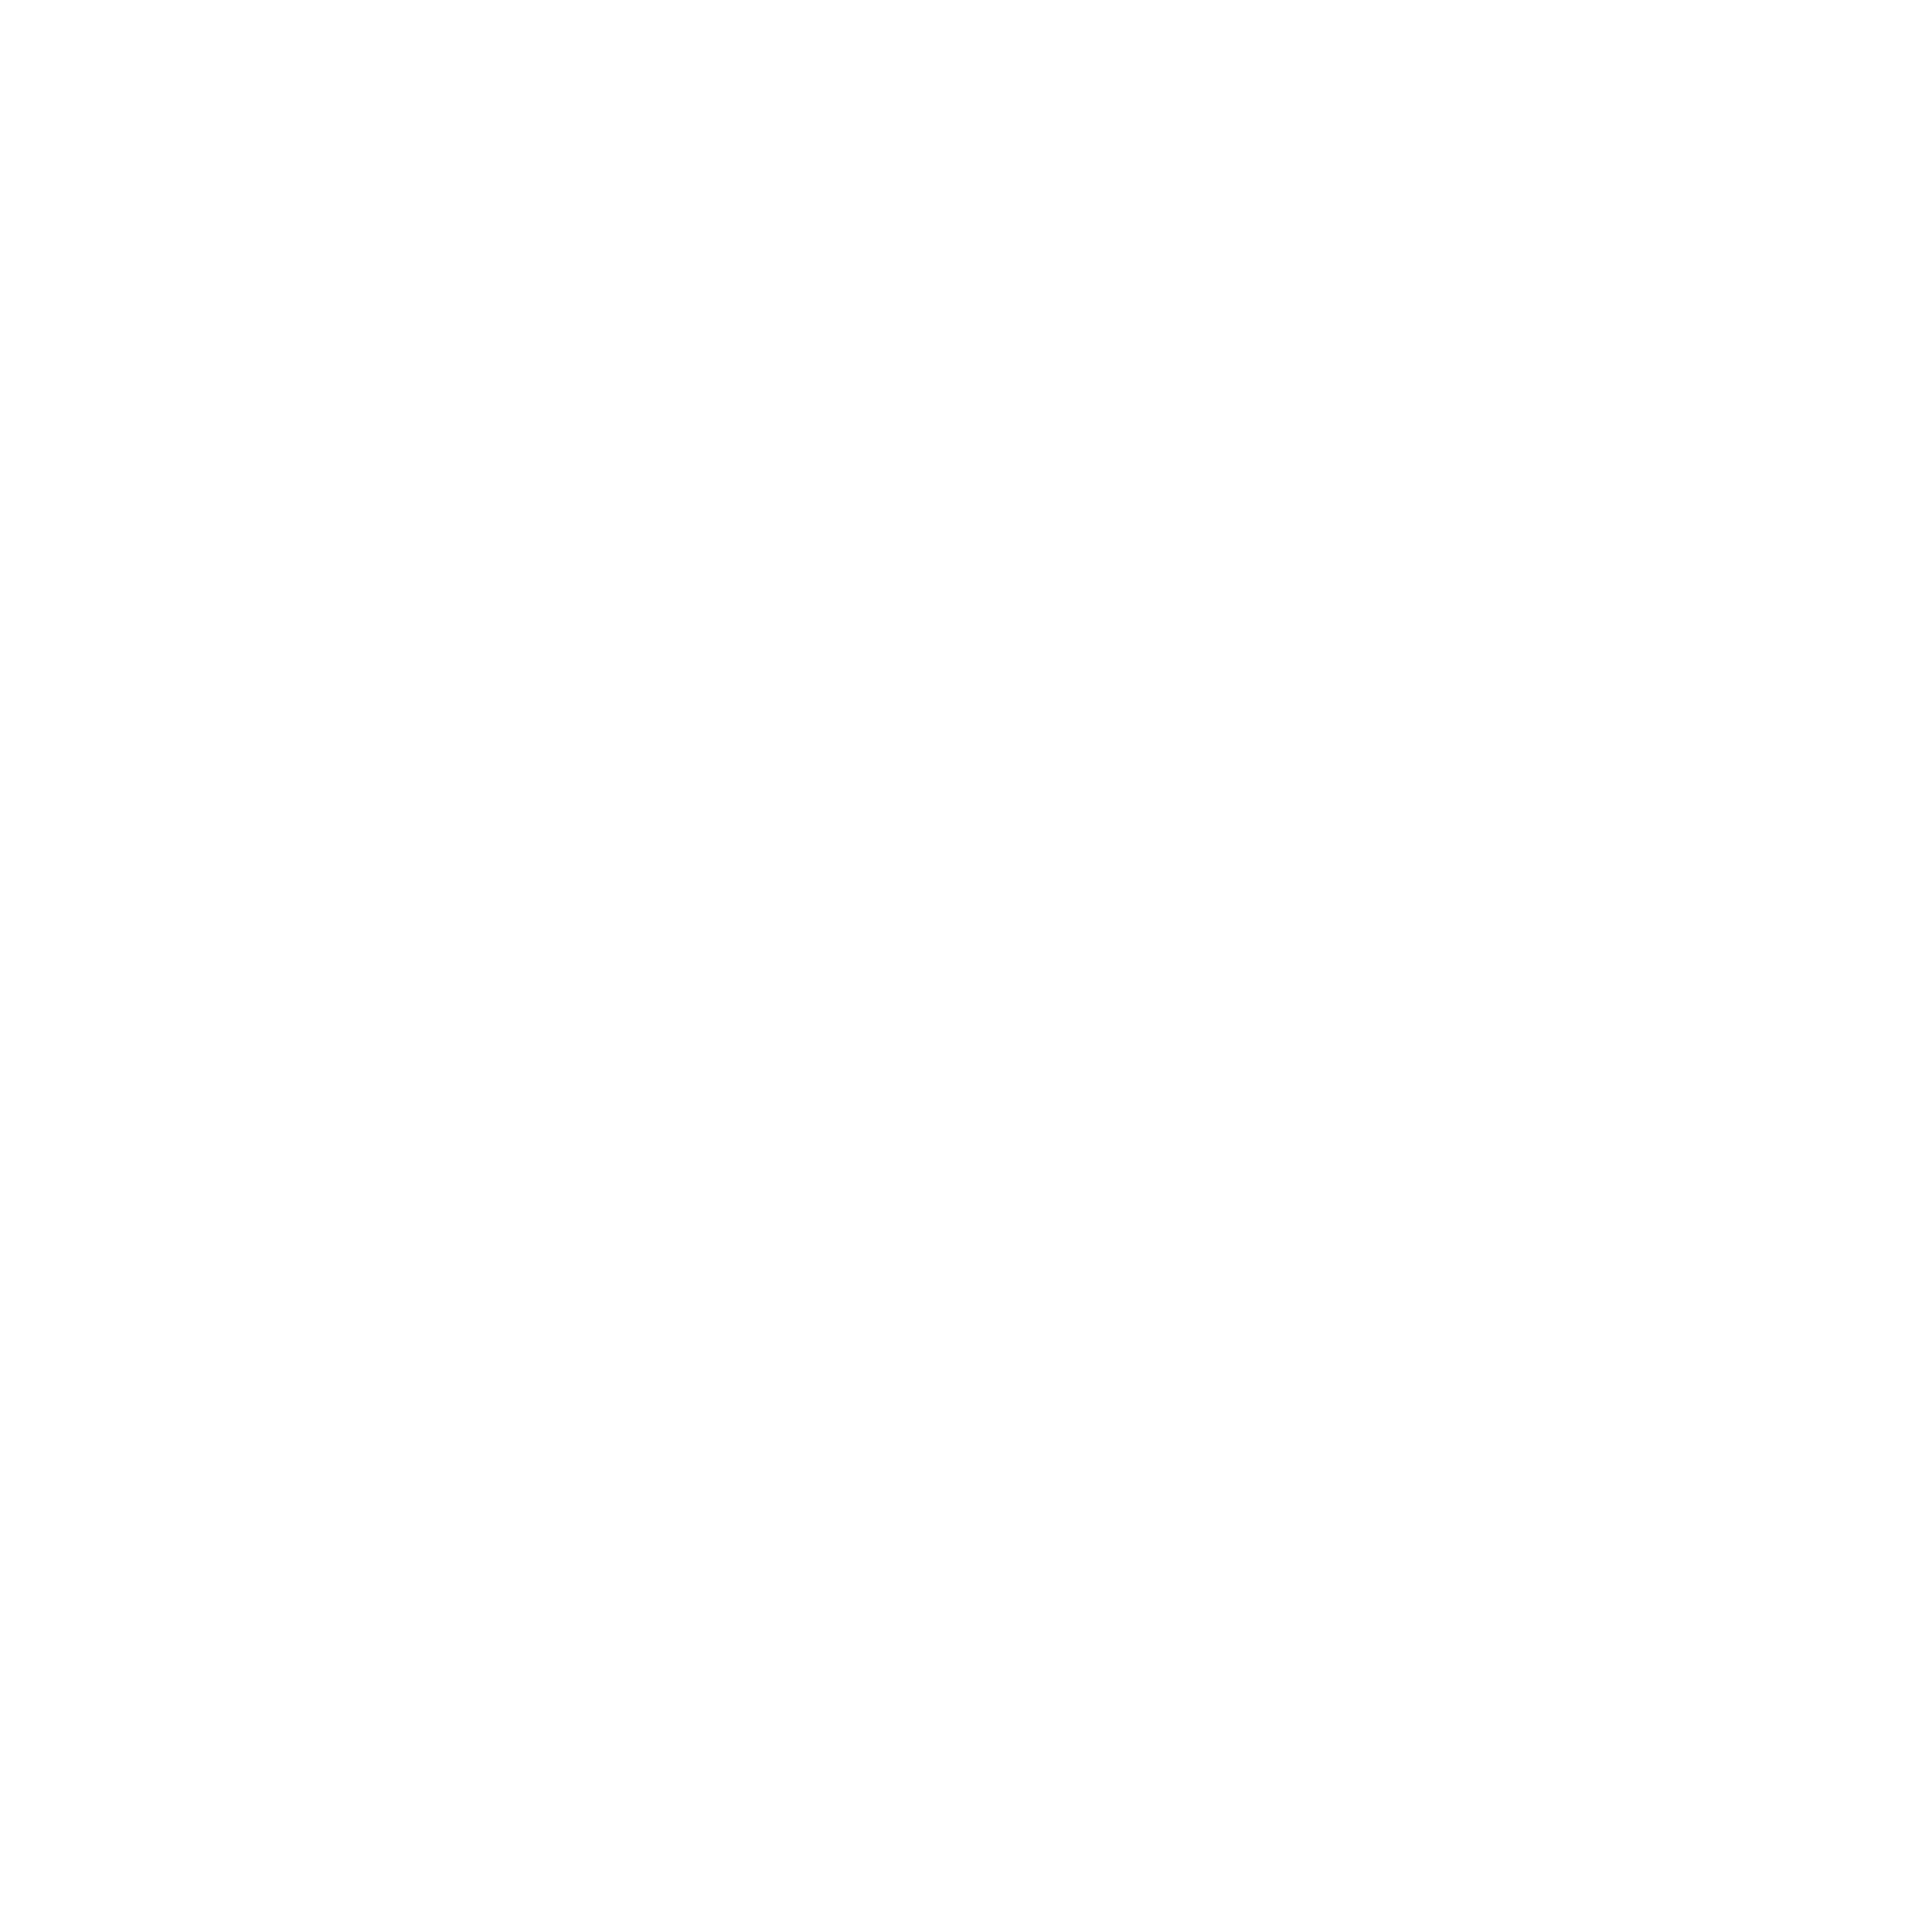 38% of students would not be able to gather $400 on short notice in a financial emergency